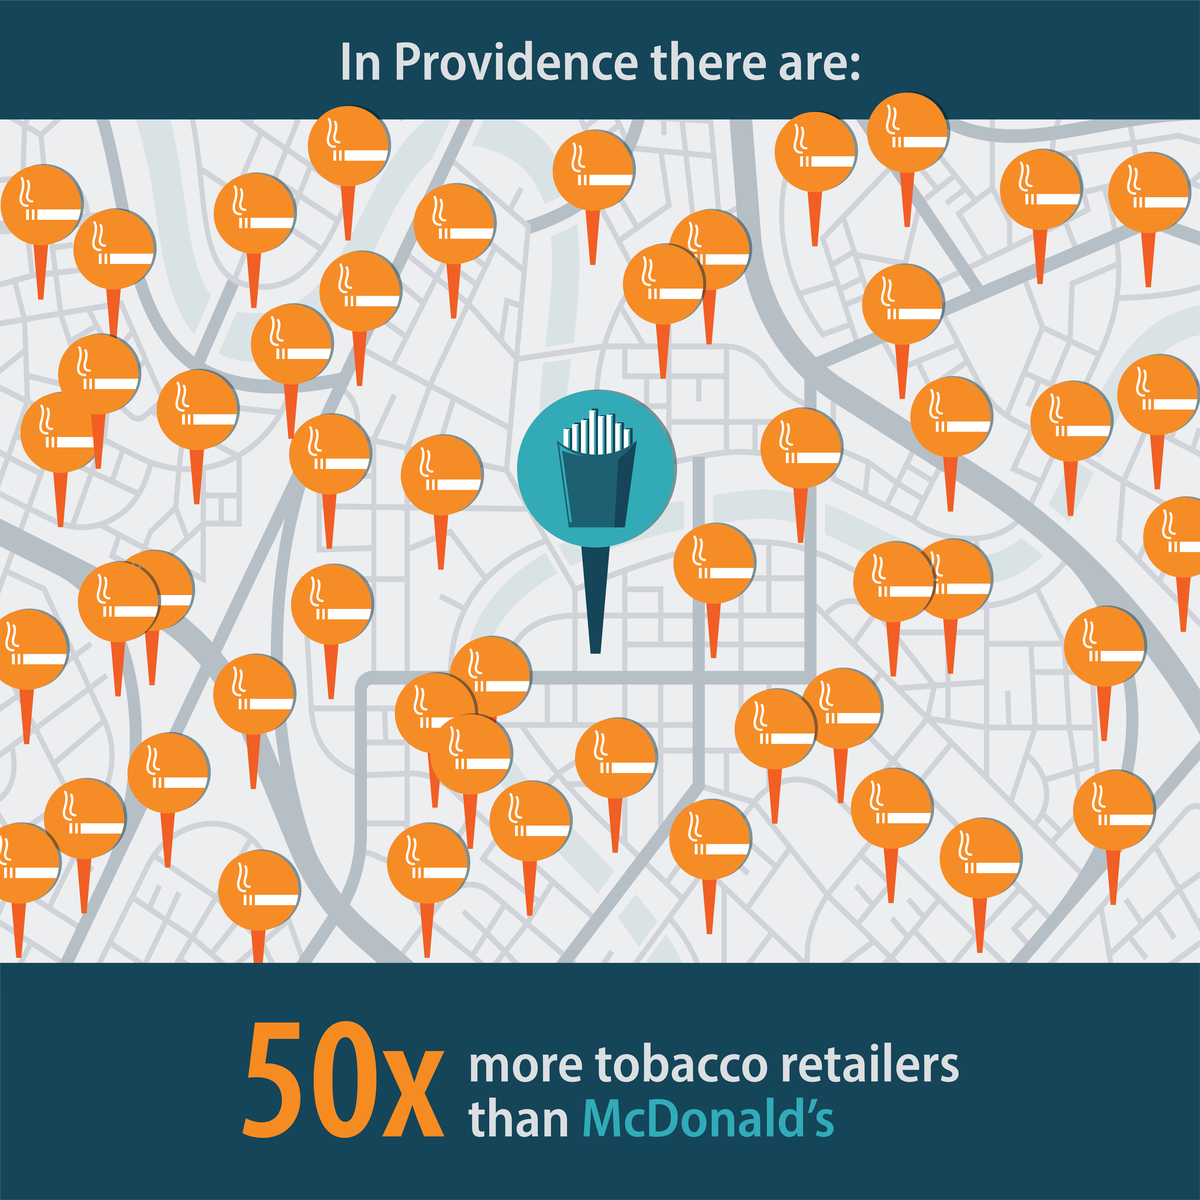 In Providence there are: 50 times more tobacco retailers than McDonald's